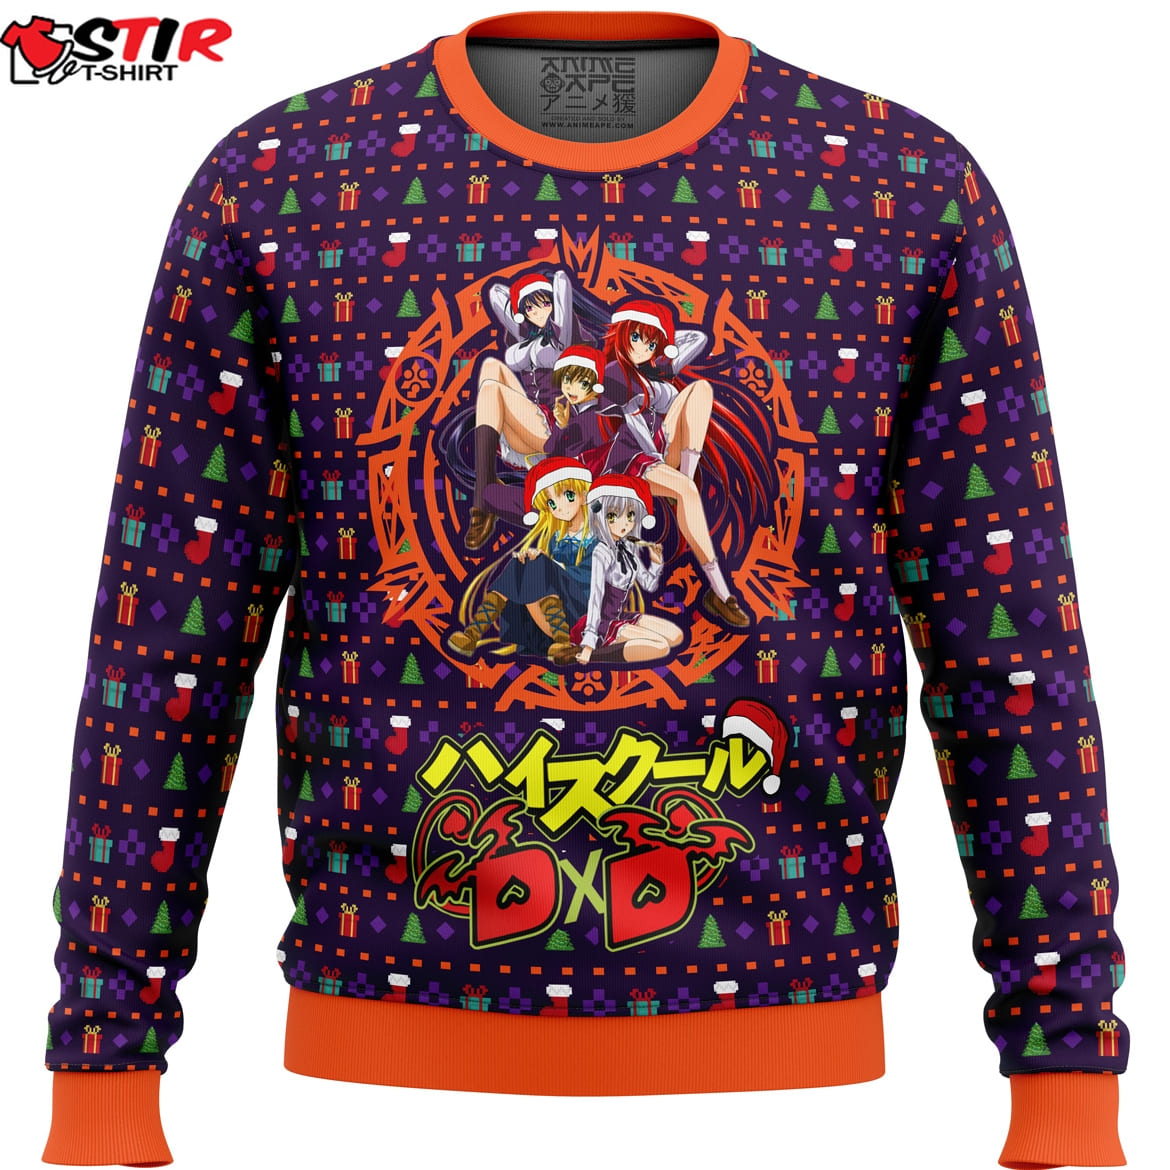 High School Dxd Dreaming His Own Harem Ugly Christmas Sweater Stirtshirt